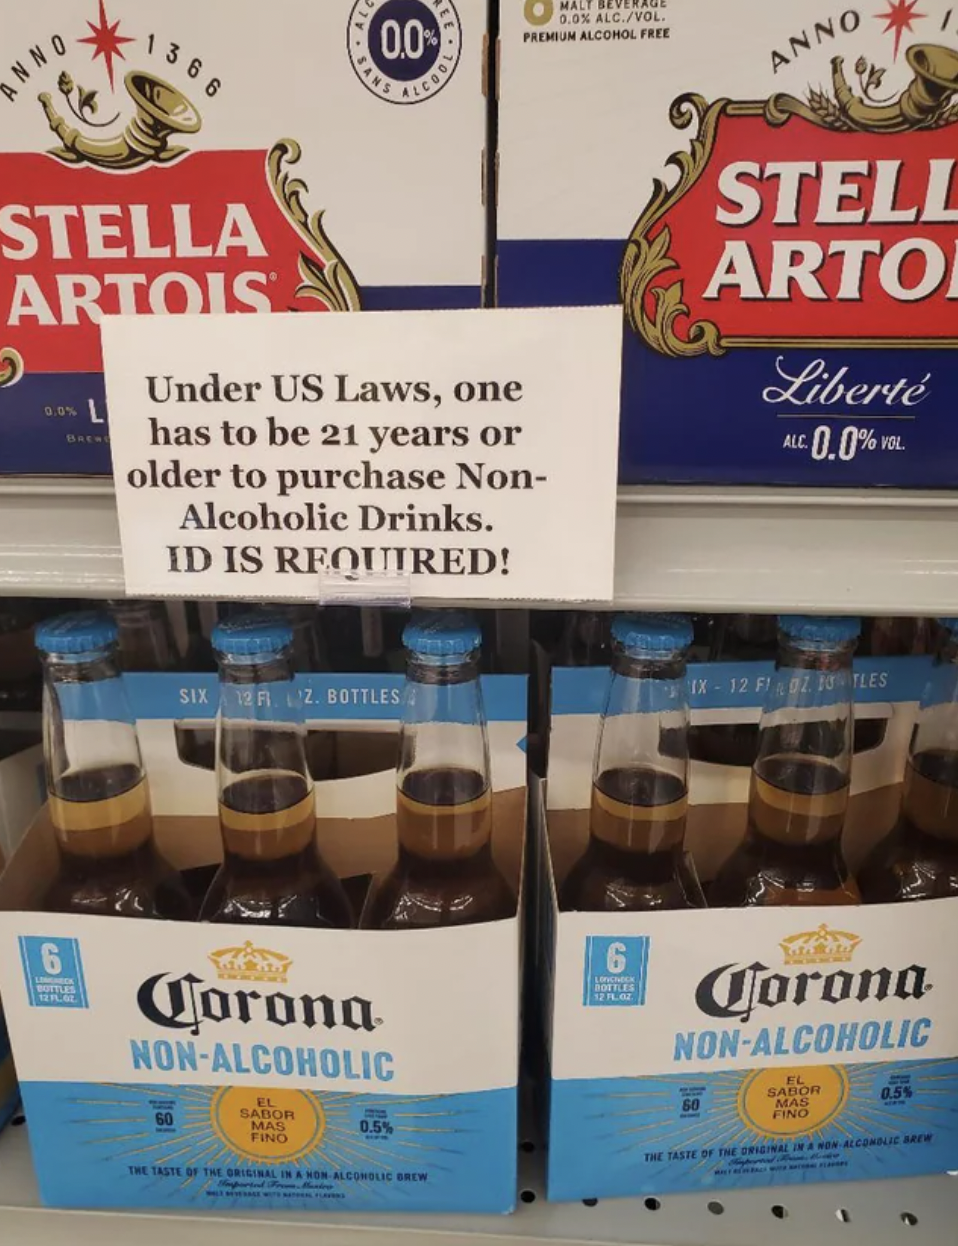 dairy product - Anno. Stella Artois O S 0.0 Under Us Laws, one has to be 21 years or older to purchase Non Alcoholic Drinks. Id Is Required! Sixer Z Bottles Corona NonAlcoholic That The Sallon Fivi Malt Several 3.3% AlcVol. Prin Alcohol Lie Brow 6 Wice An